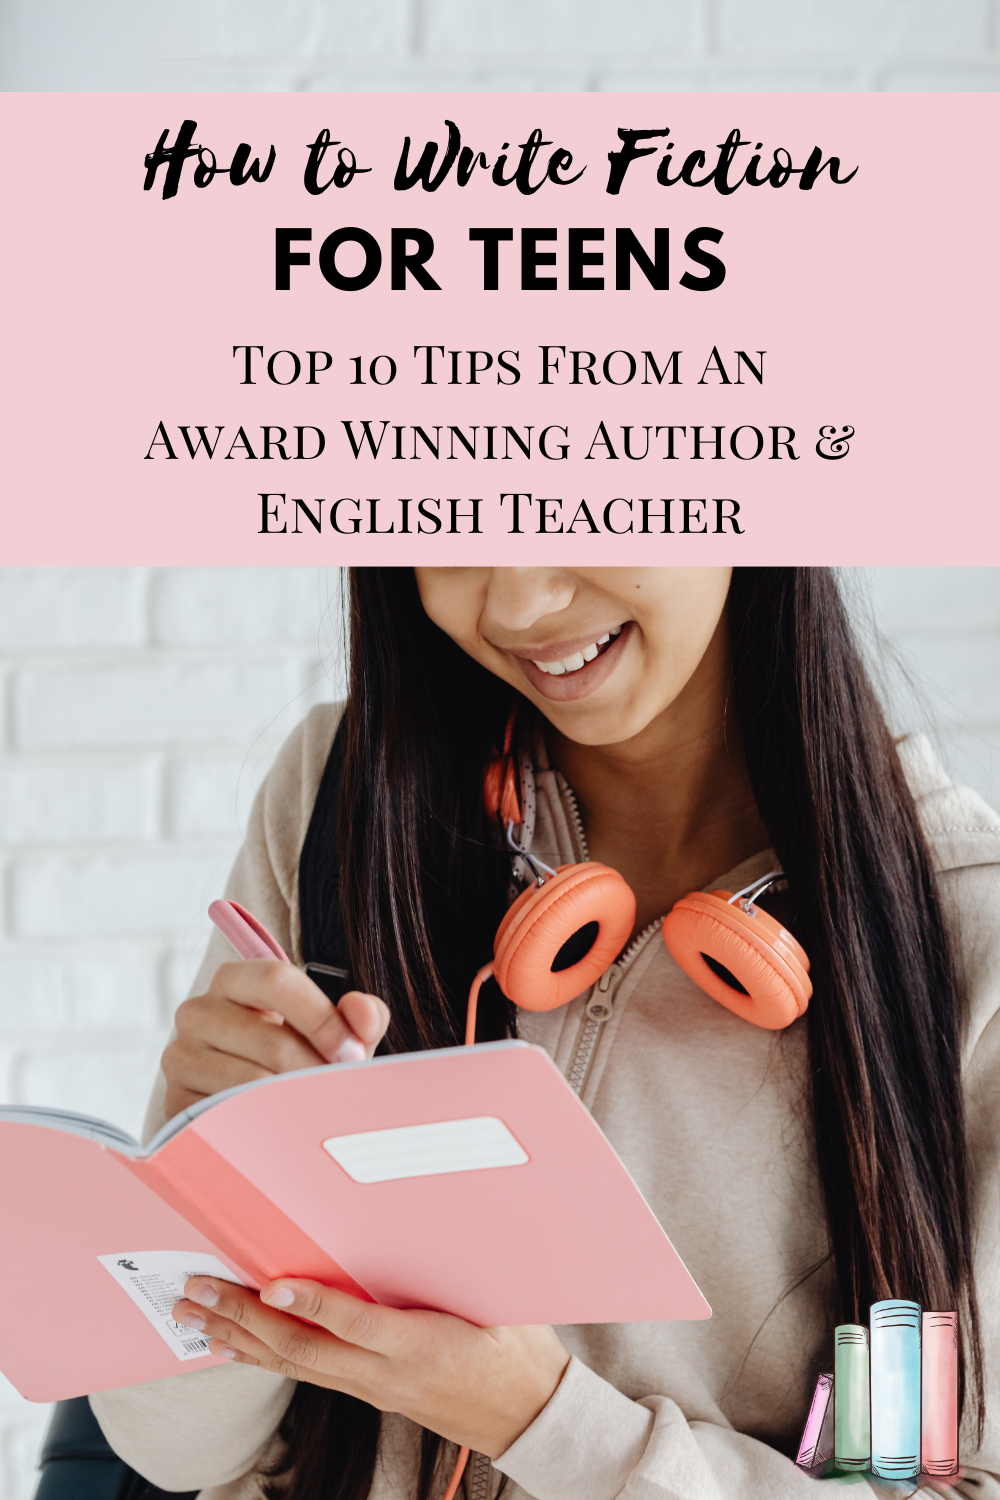 Top 10 Writing Tips for Teens